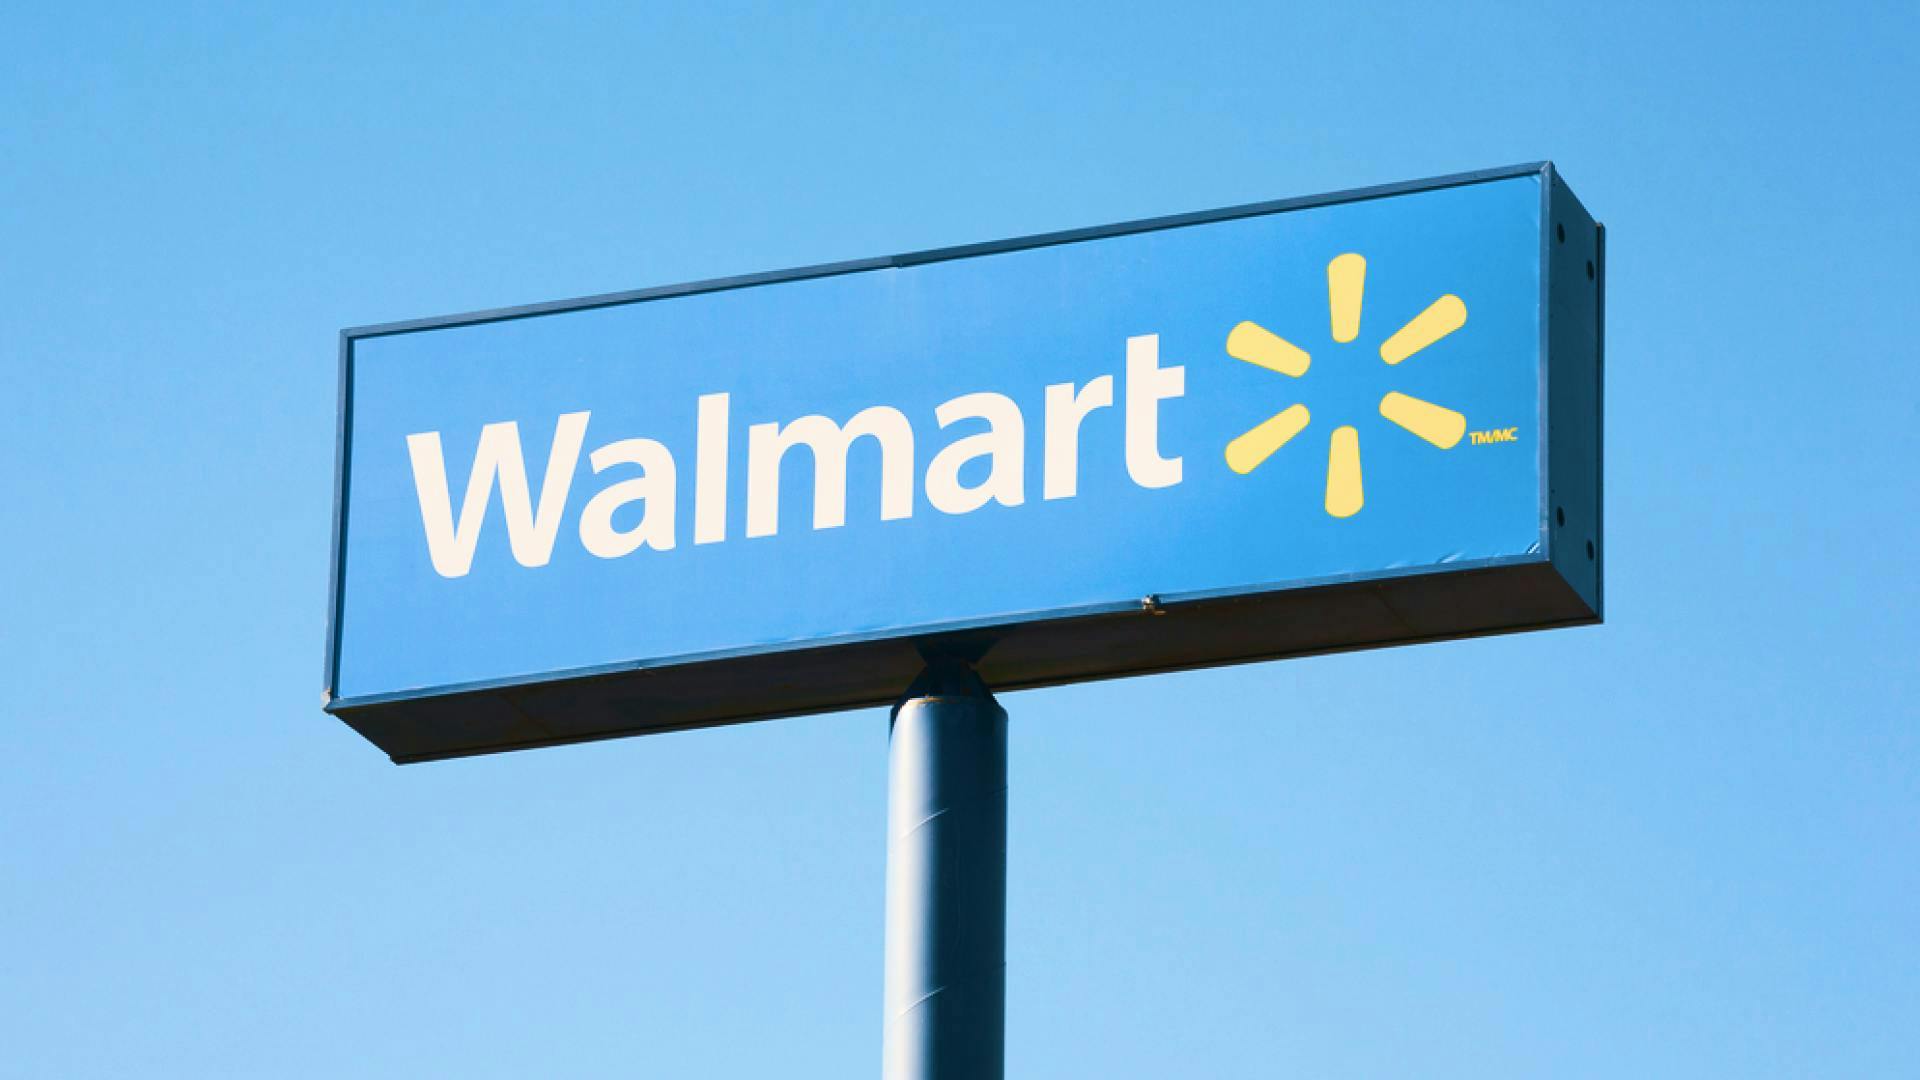 Walmart Implements Major Corporate Changes Including Job Cuts and RTO Policies